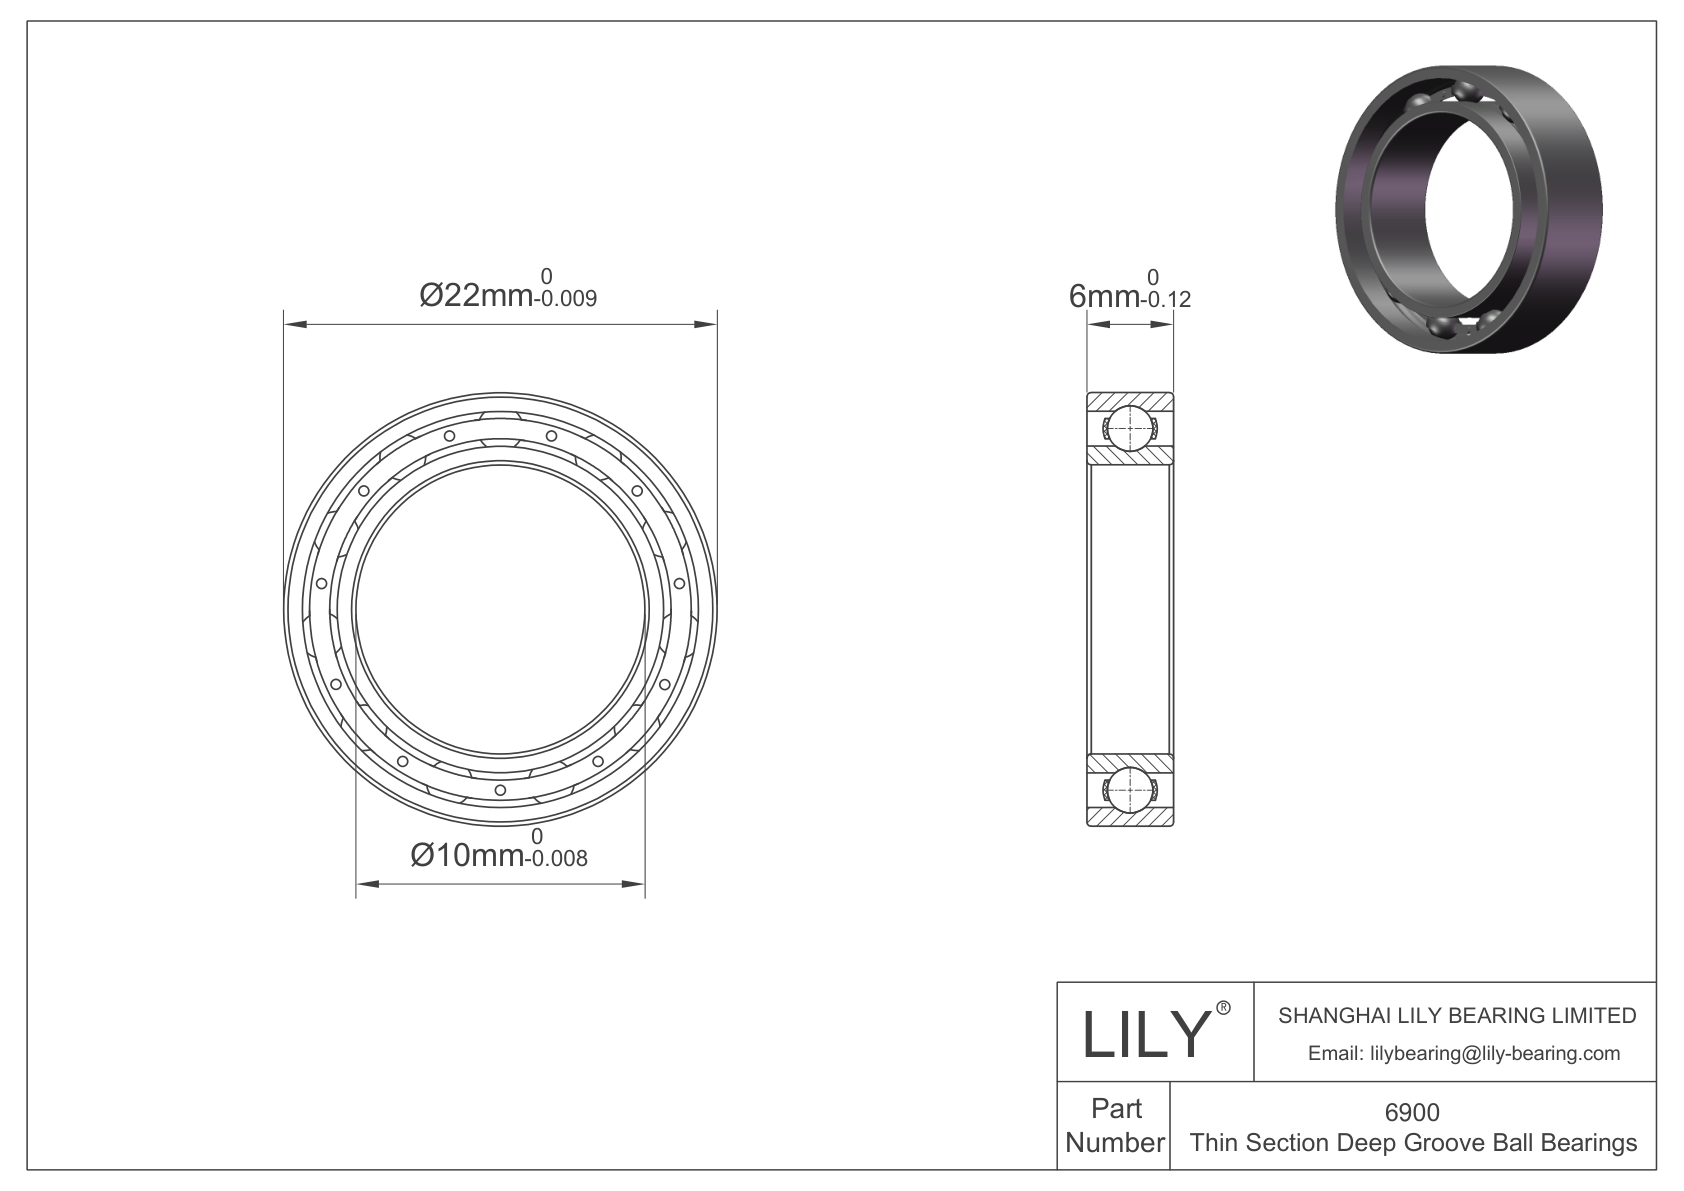 LILY-BS690026-10 POM Coated Bearing cad drawing